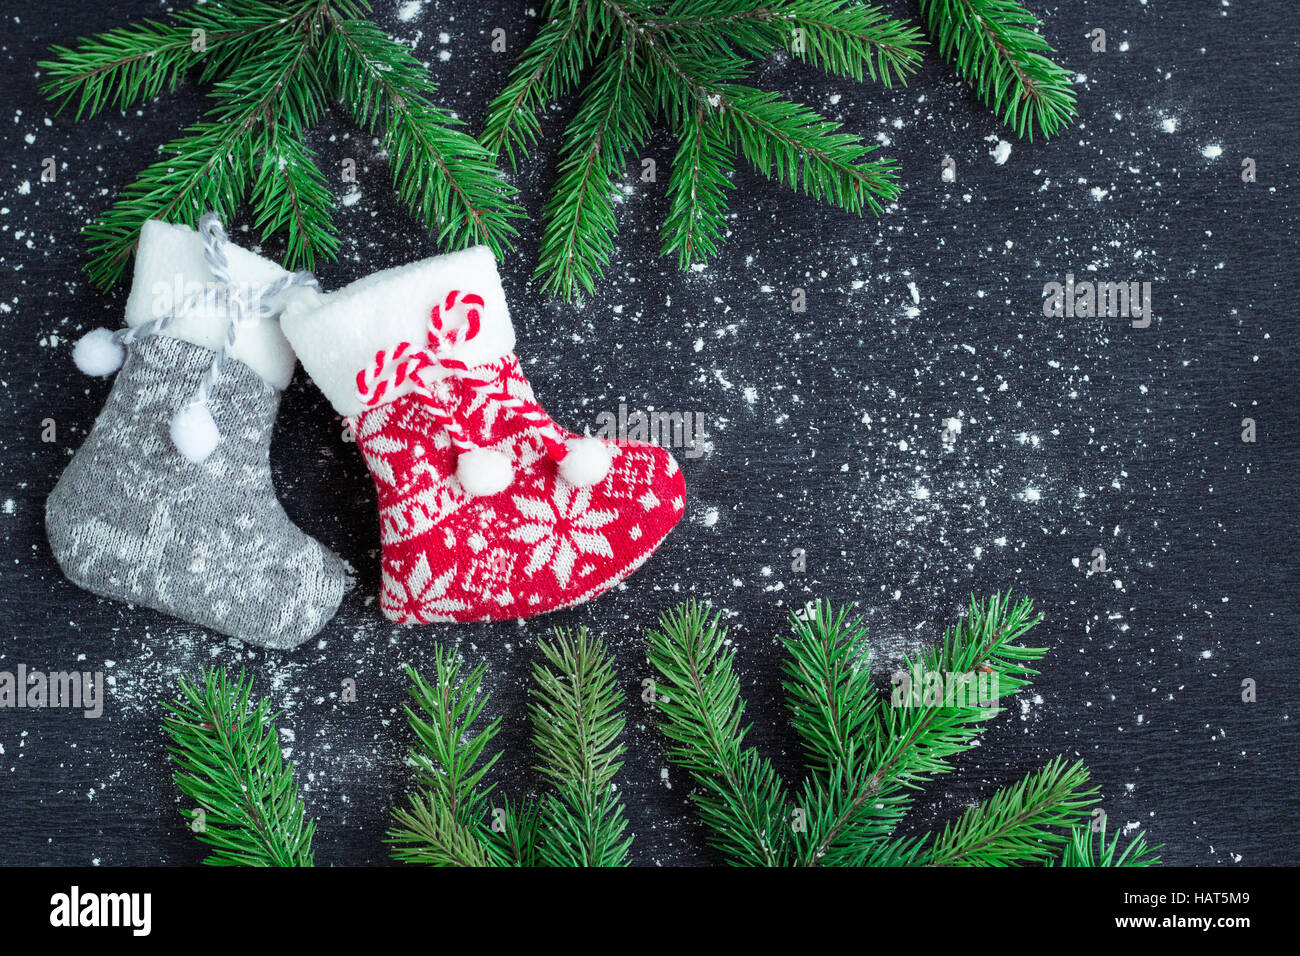 Christmas and New Year winter holiday snowbound composition of grey and red stockings on black space background with green fir tree branches Stock Photo